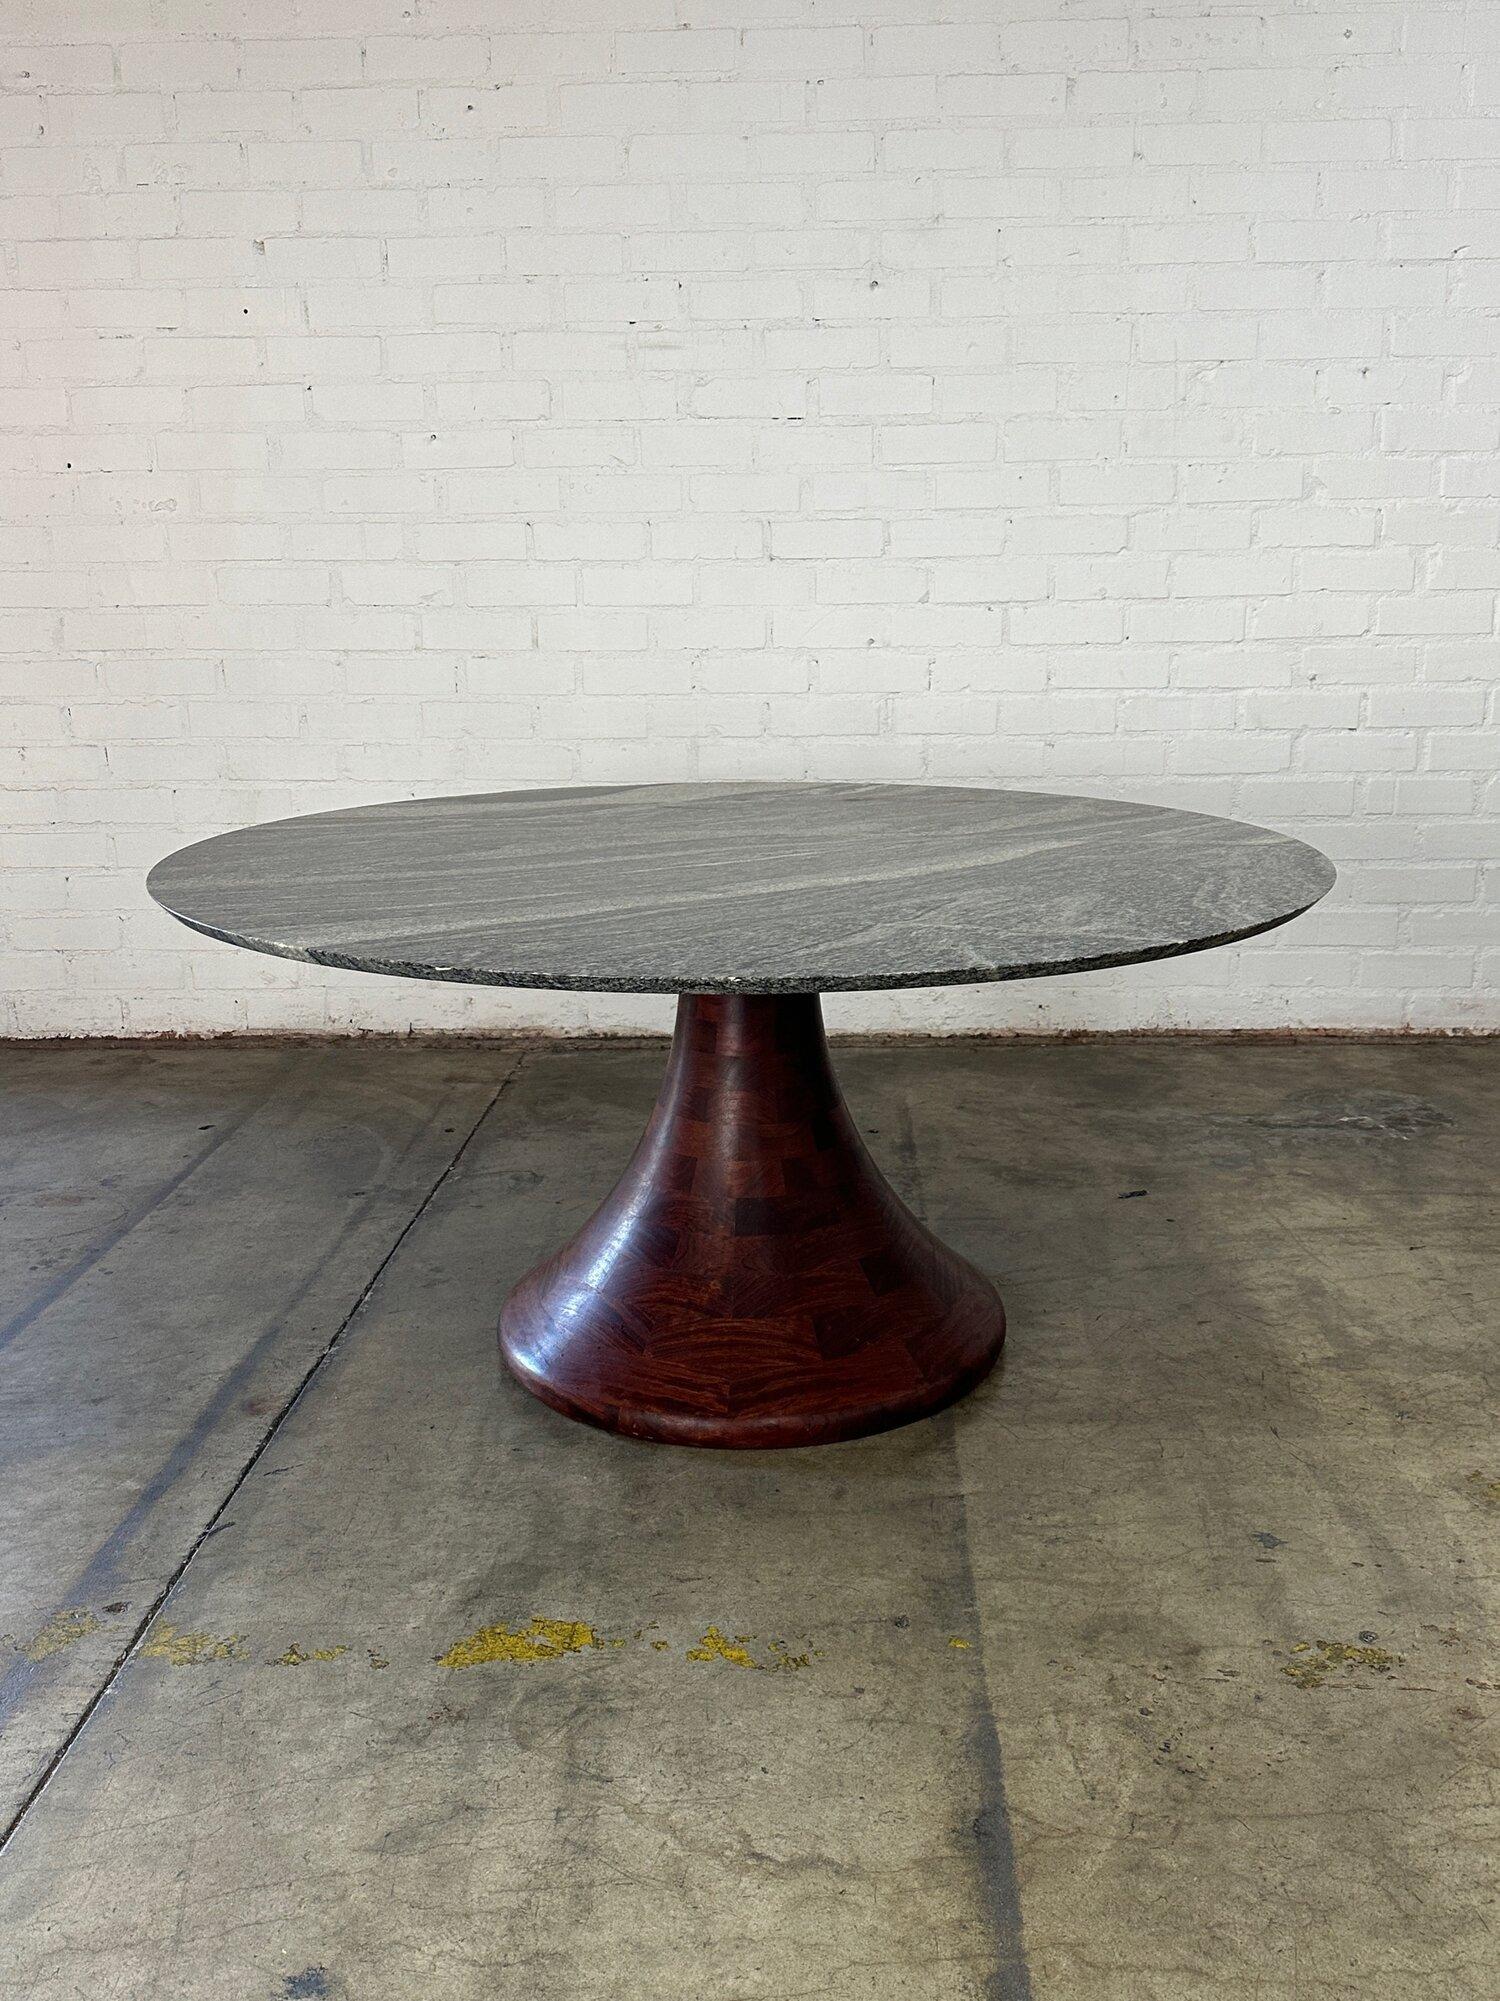 W54 H30.5 KC29

Italian dining table with a stone surface that seems to be marble or granite. Surface is in good overall condition with no major areas of wear. Minor surface touch ups are visible on the second to last photo. Base seems to made of